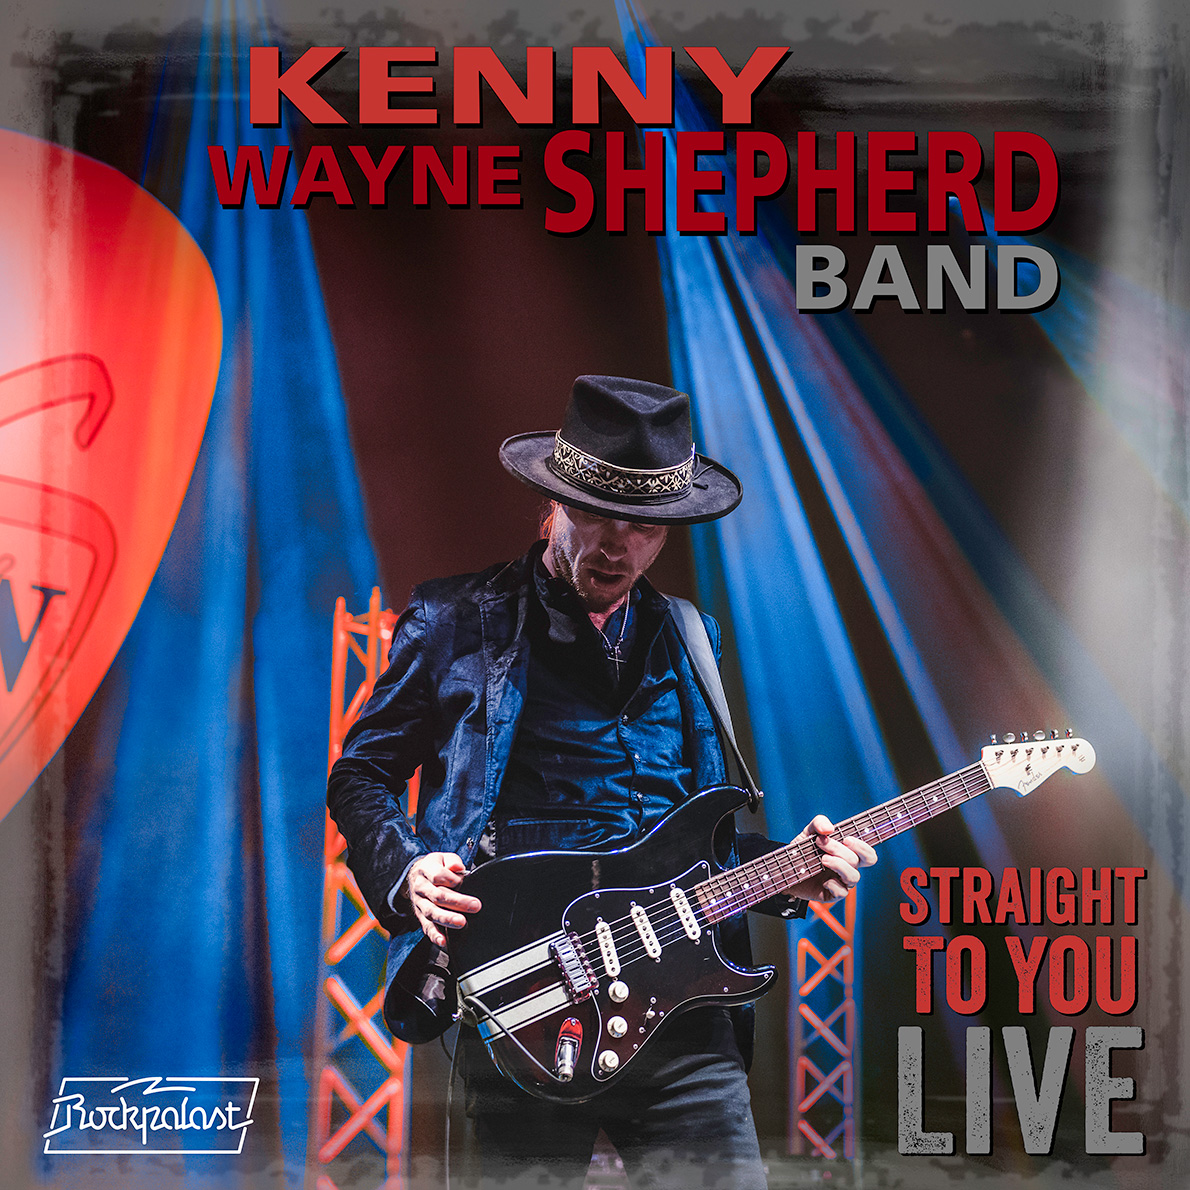 Kenny Wayne Shepherd Coming Straight At You With His “Straight To You